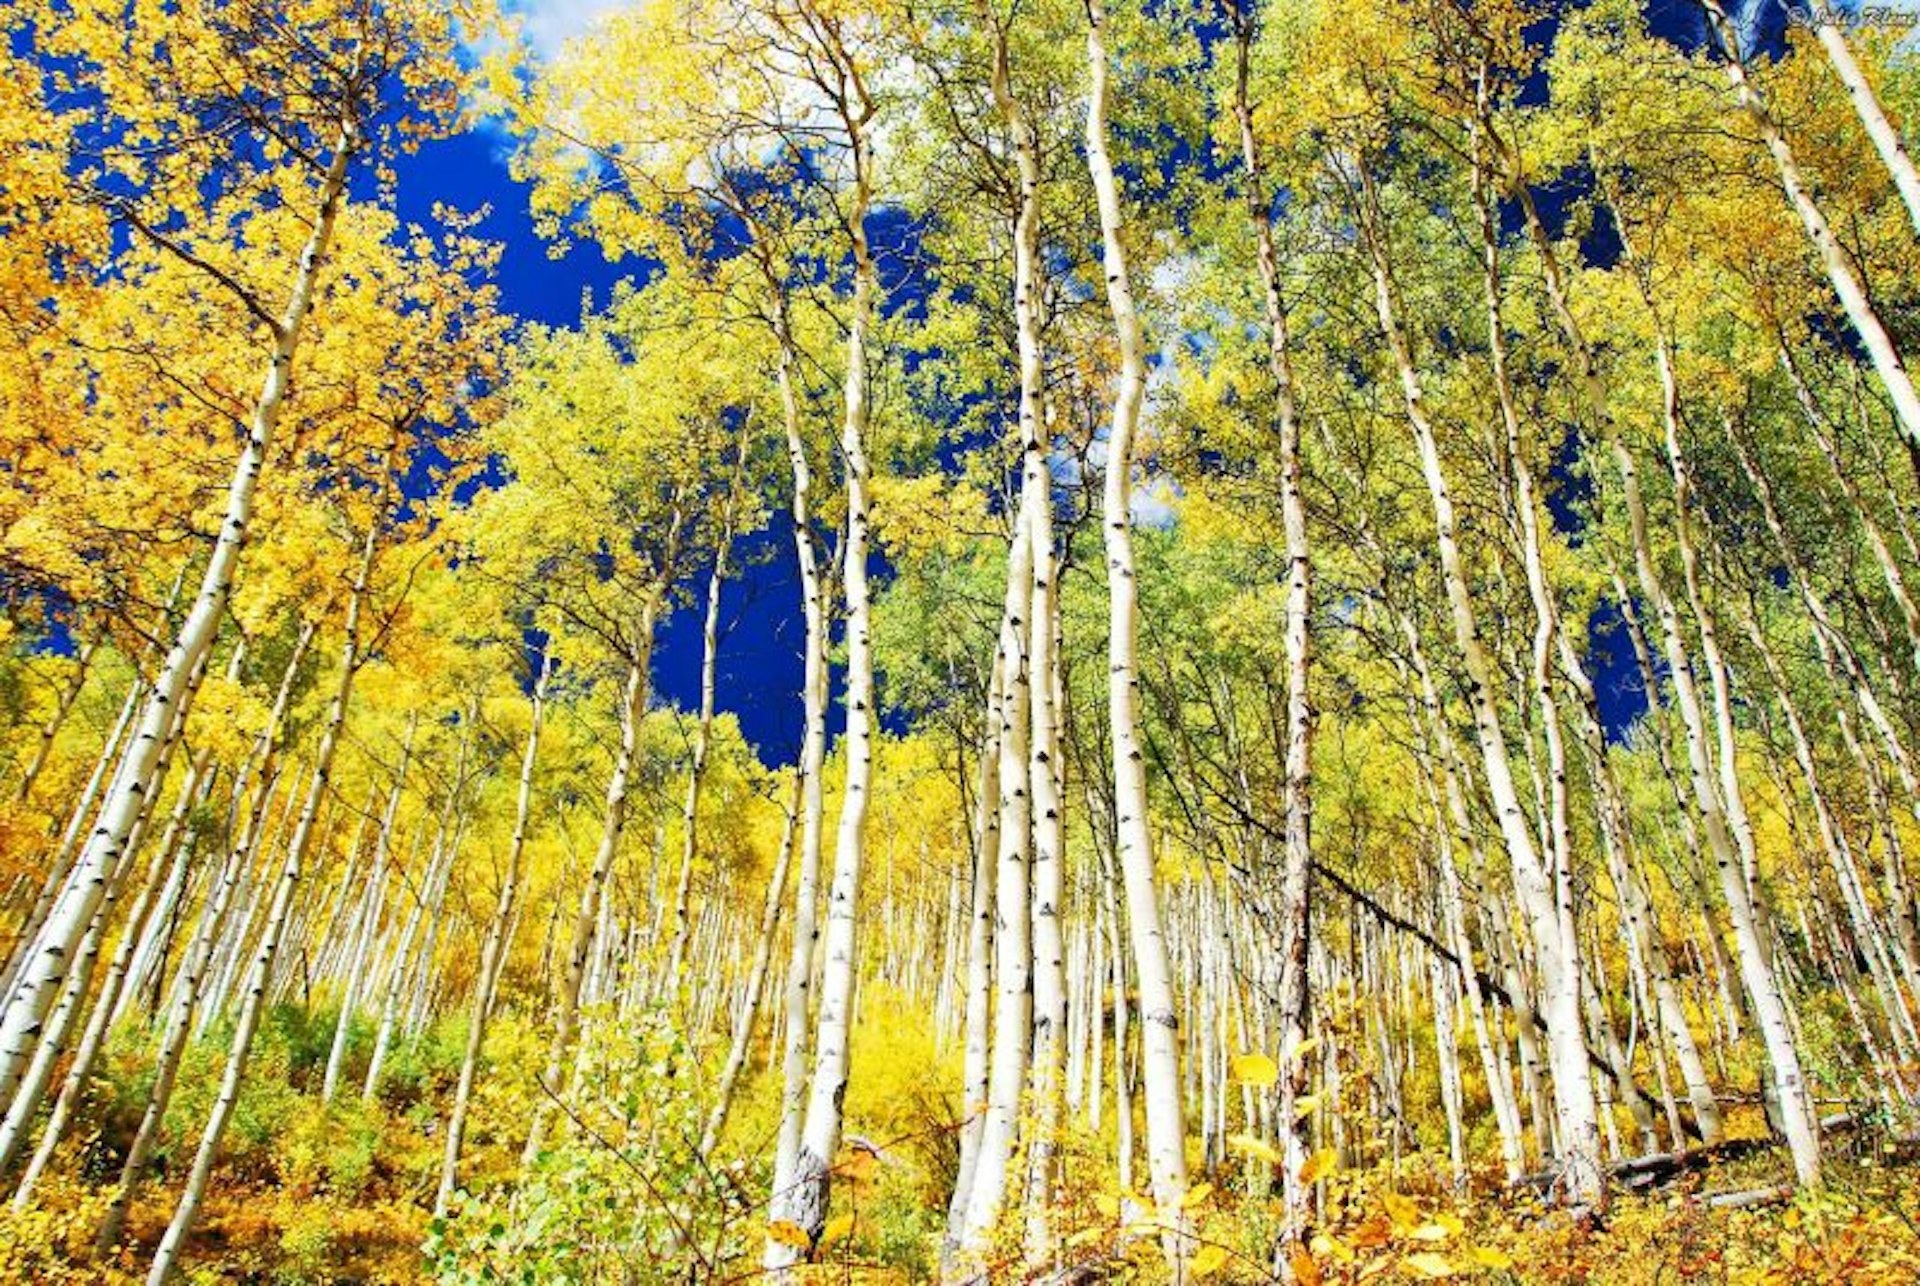 Aspen trees in Vail beginning to turn yellow, against a brilliant blue sky